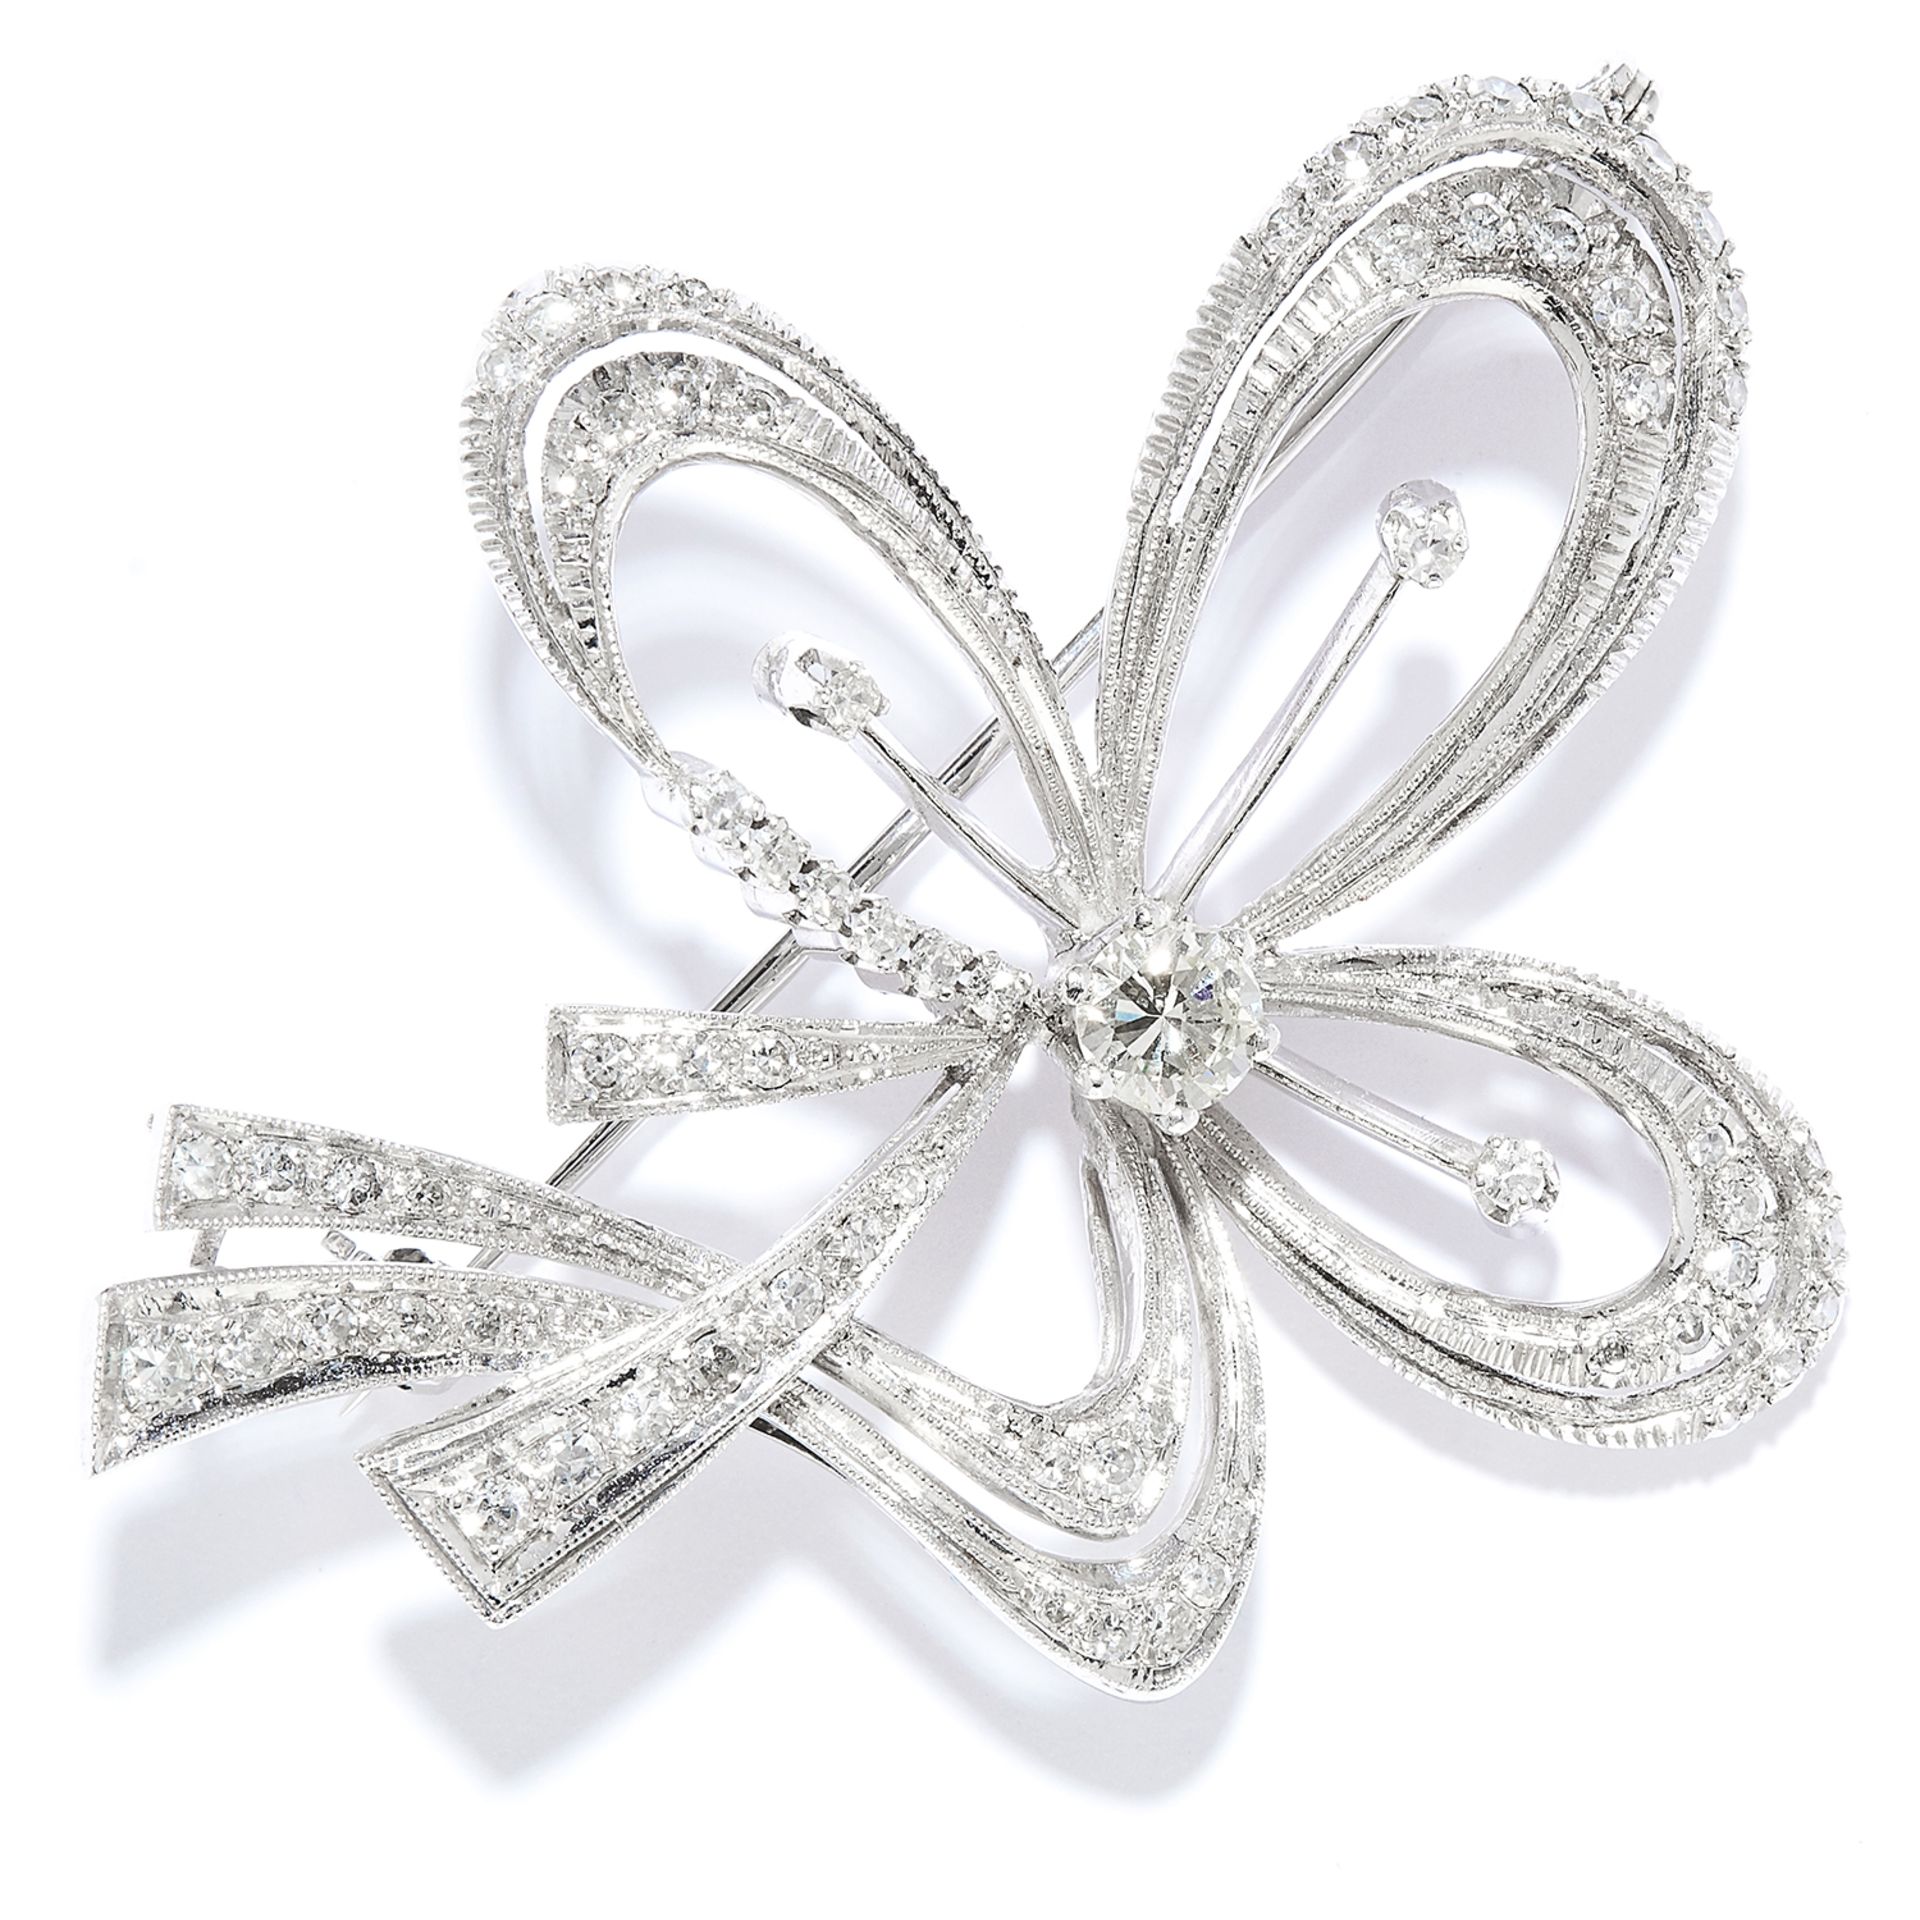 DIAMOND RIBBON BROOCH in 18ct white gold, designed as a ribbon and bow motif, set with a central